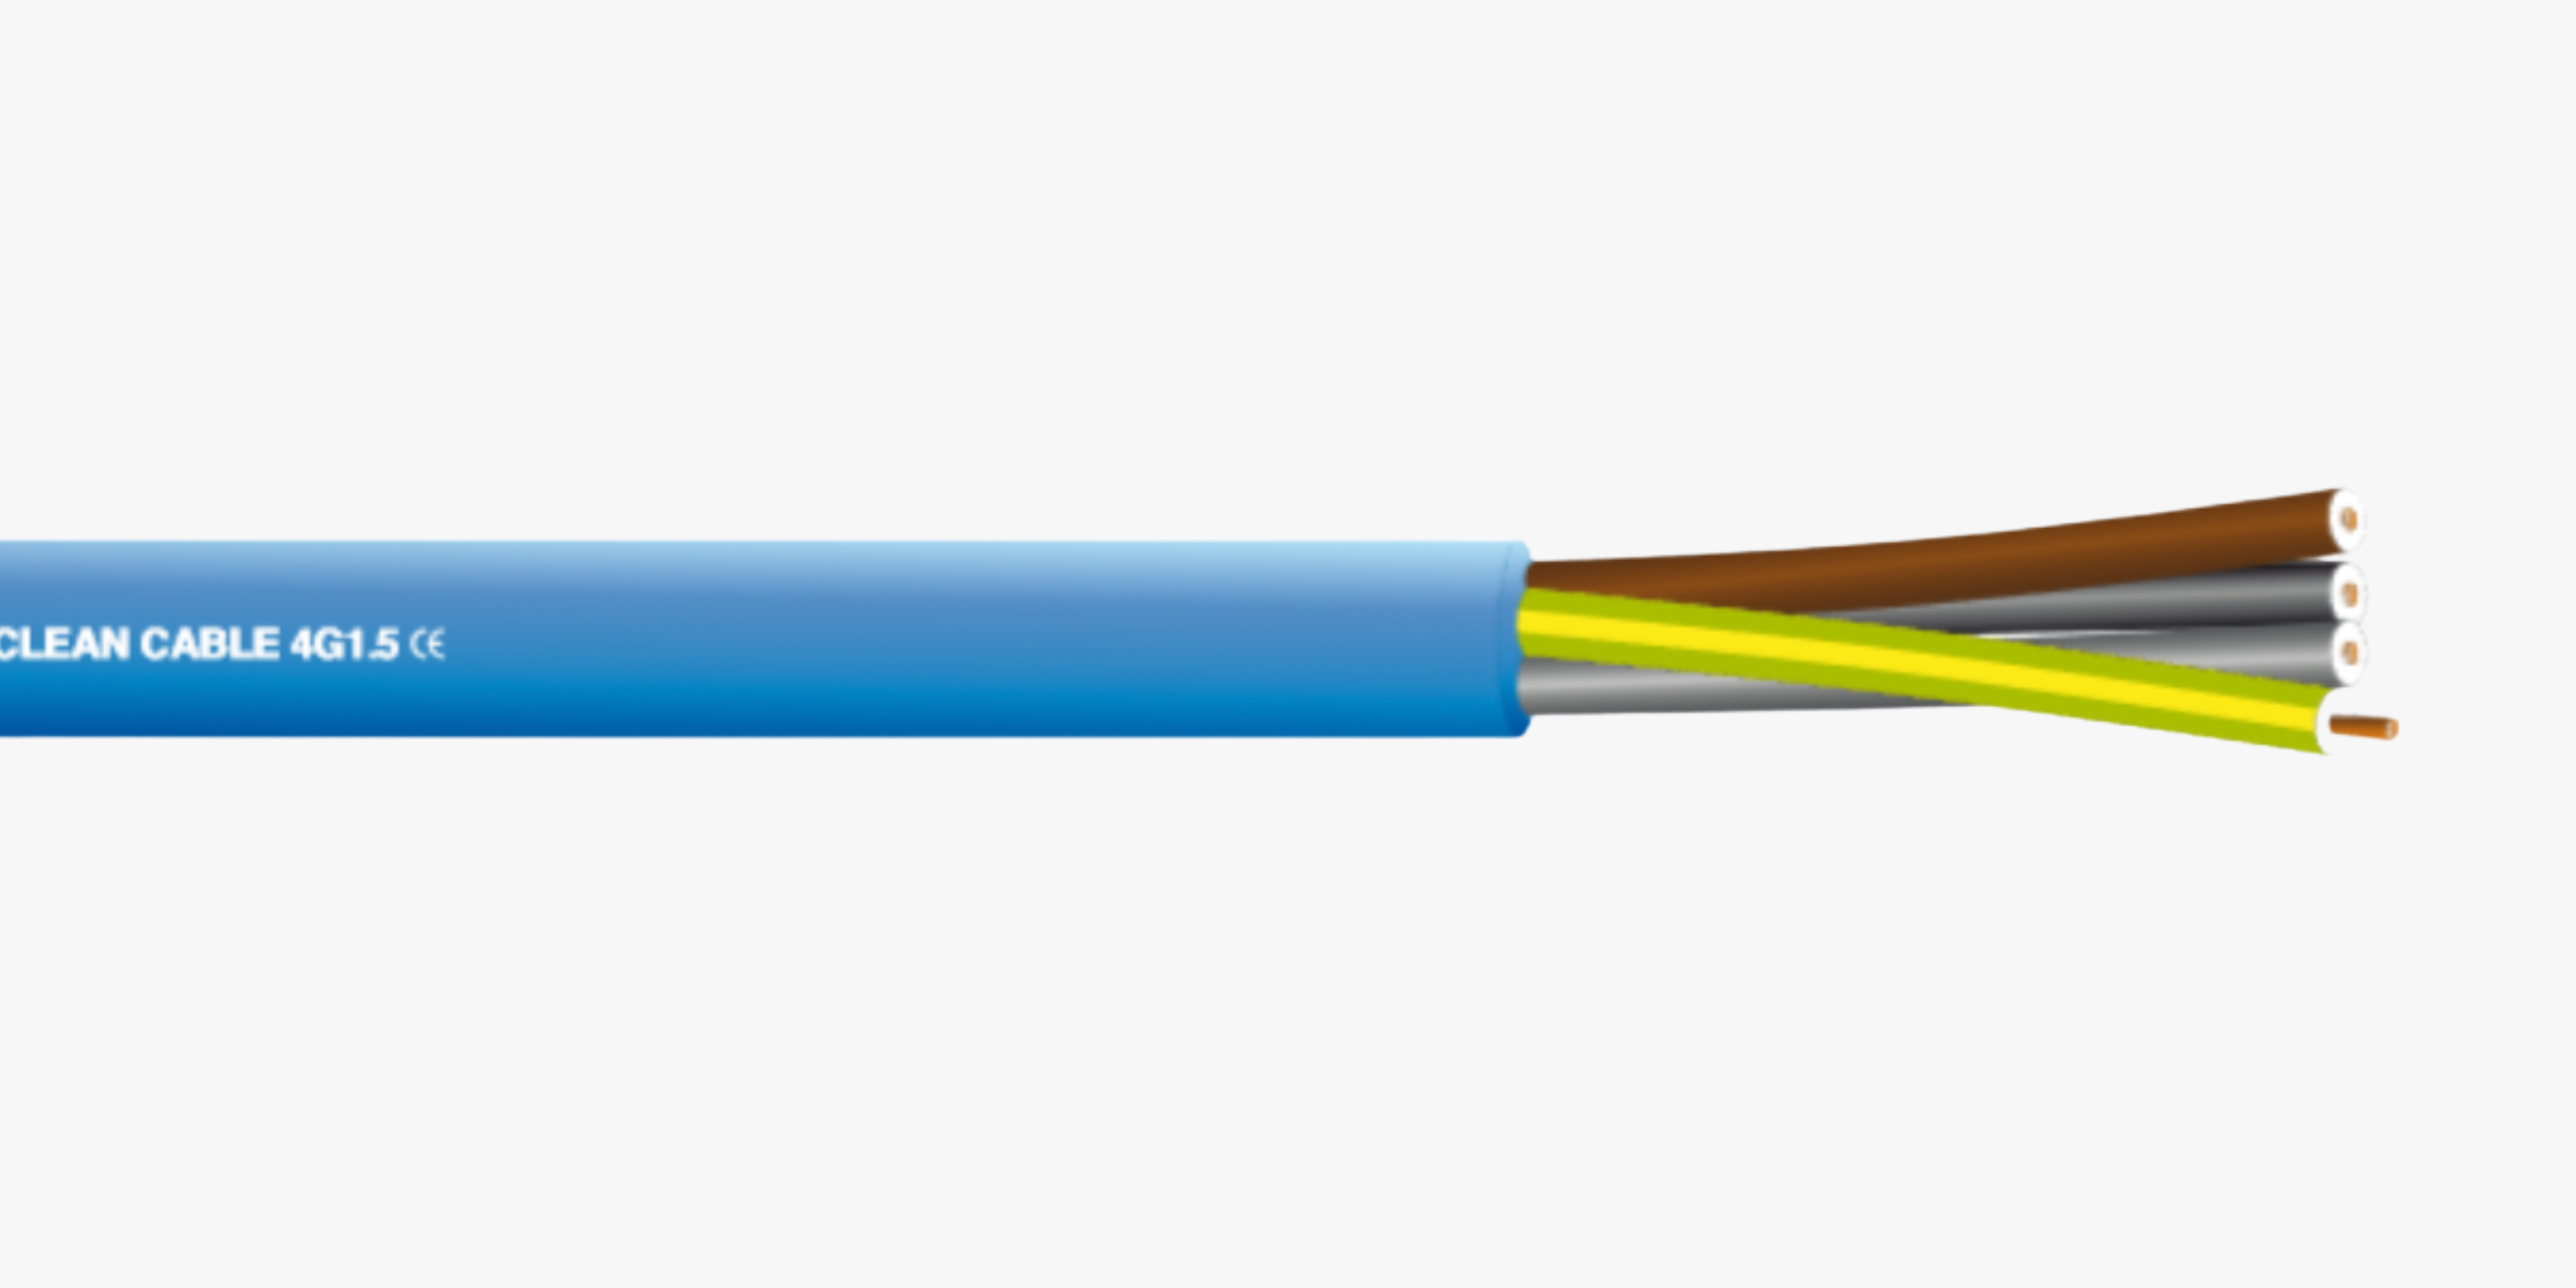 CLEAN CABLE- DRINKING WATER Cables